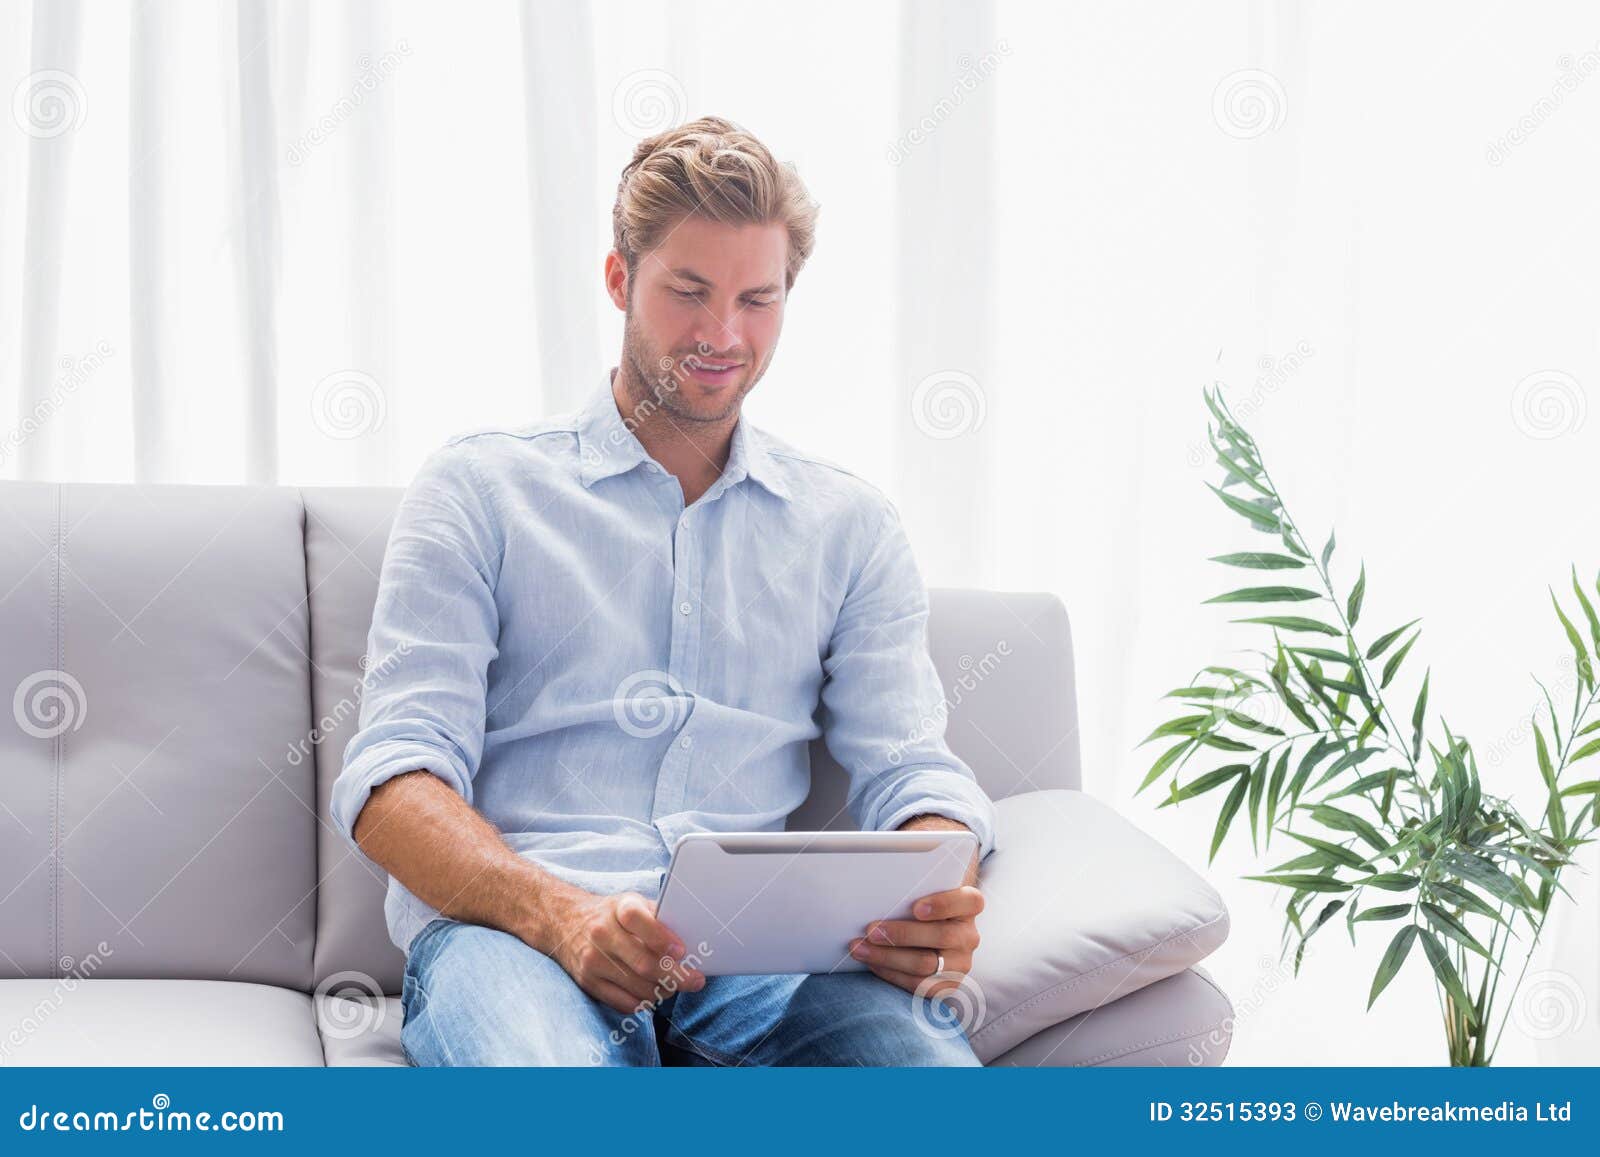 Man Using A Tablet While He Is Sat On The Couch Stock Image Image Of Blonde Attractive